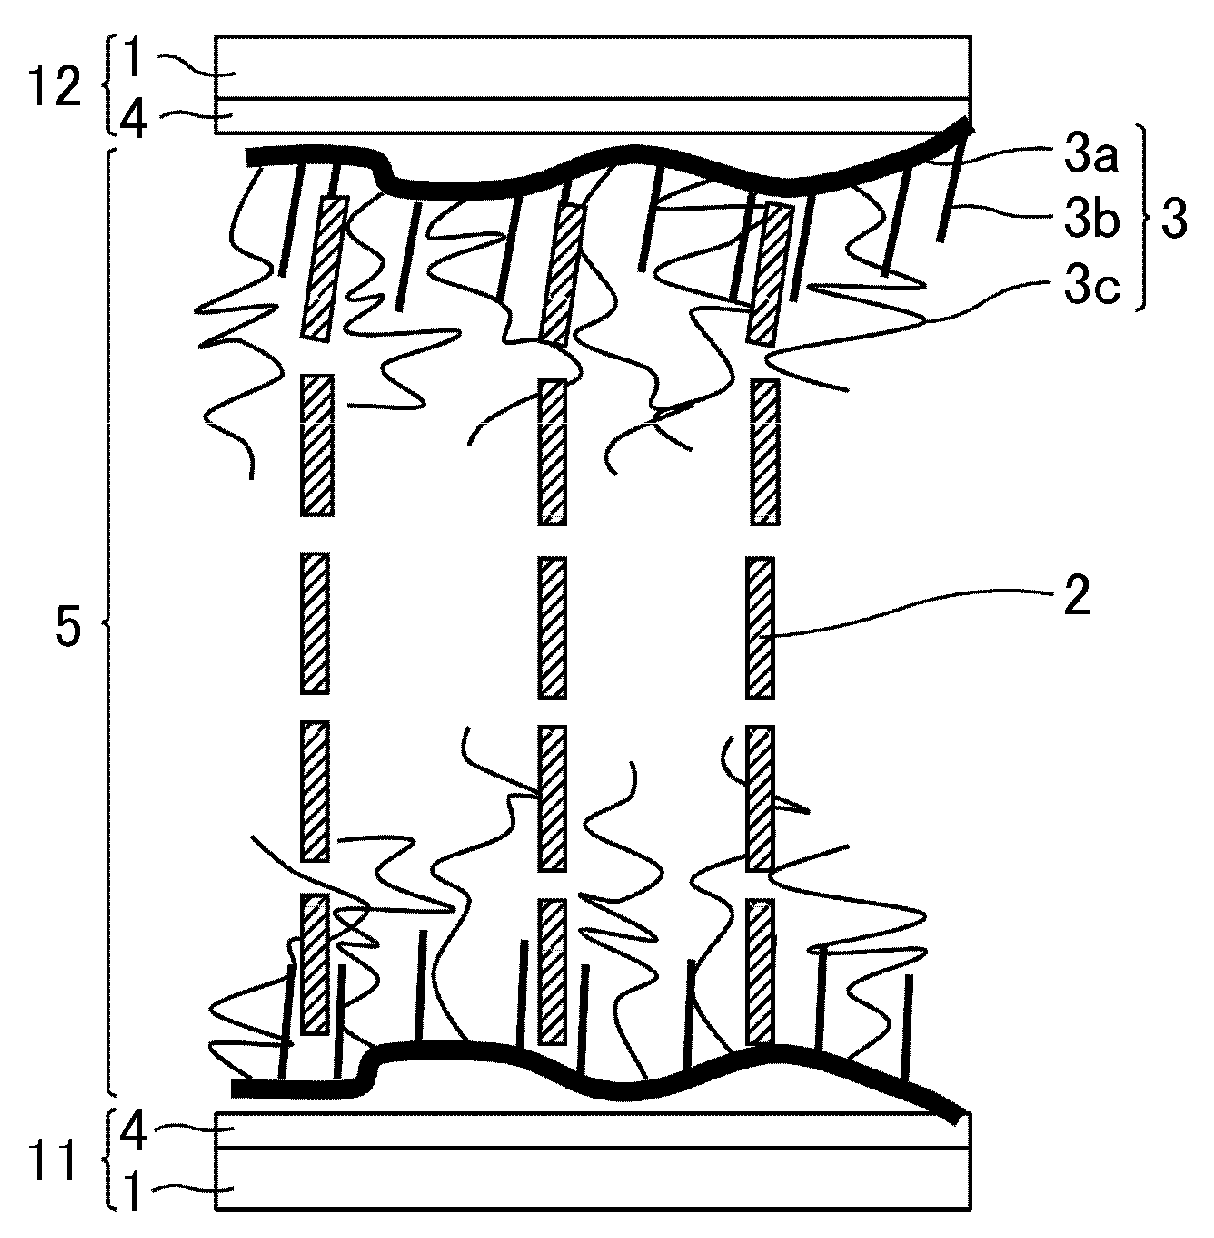 Liquid-crystal display device, process for producing liquid-crystal display device, and composition for forming alignment film